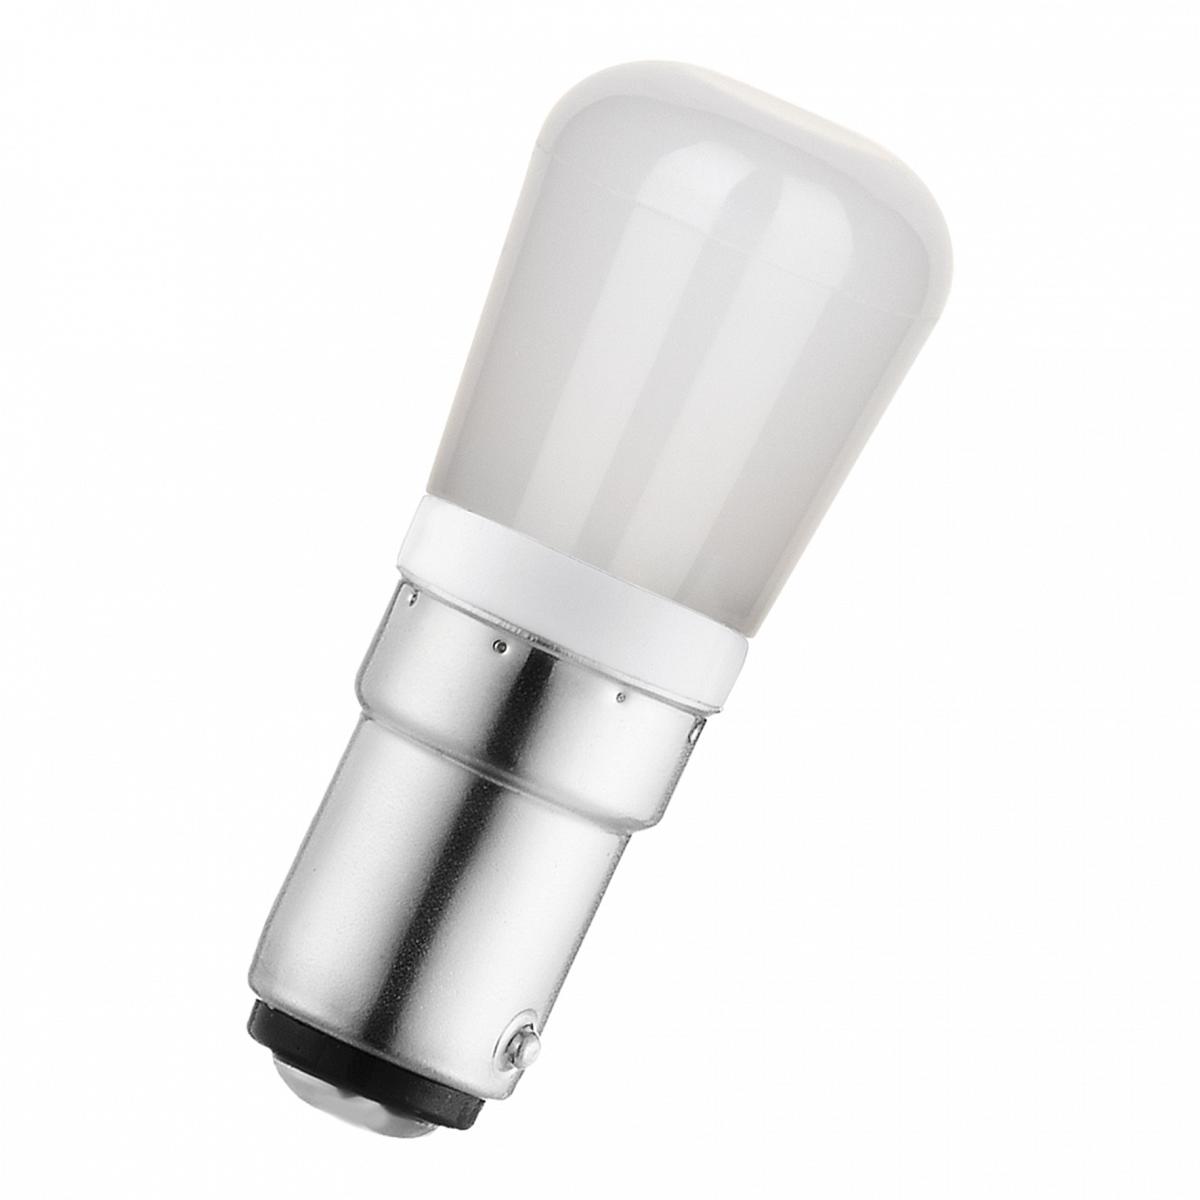 145121 - LED - Ba15d Compact - LED Lamps Products | Bailey